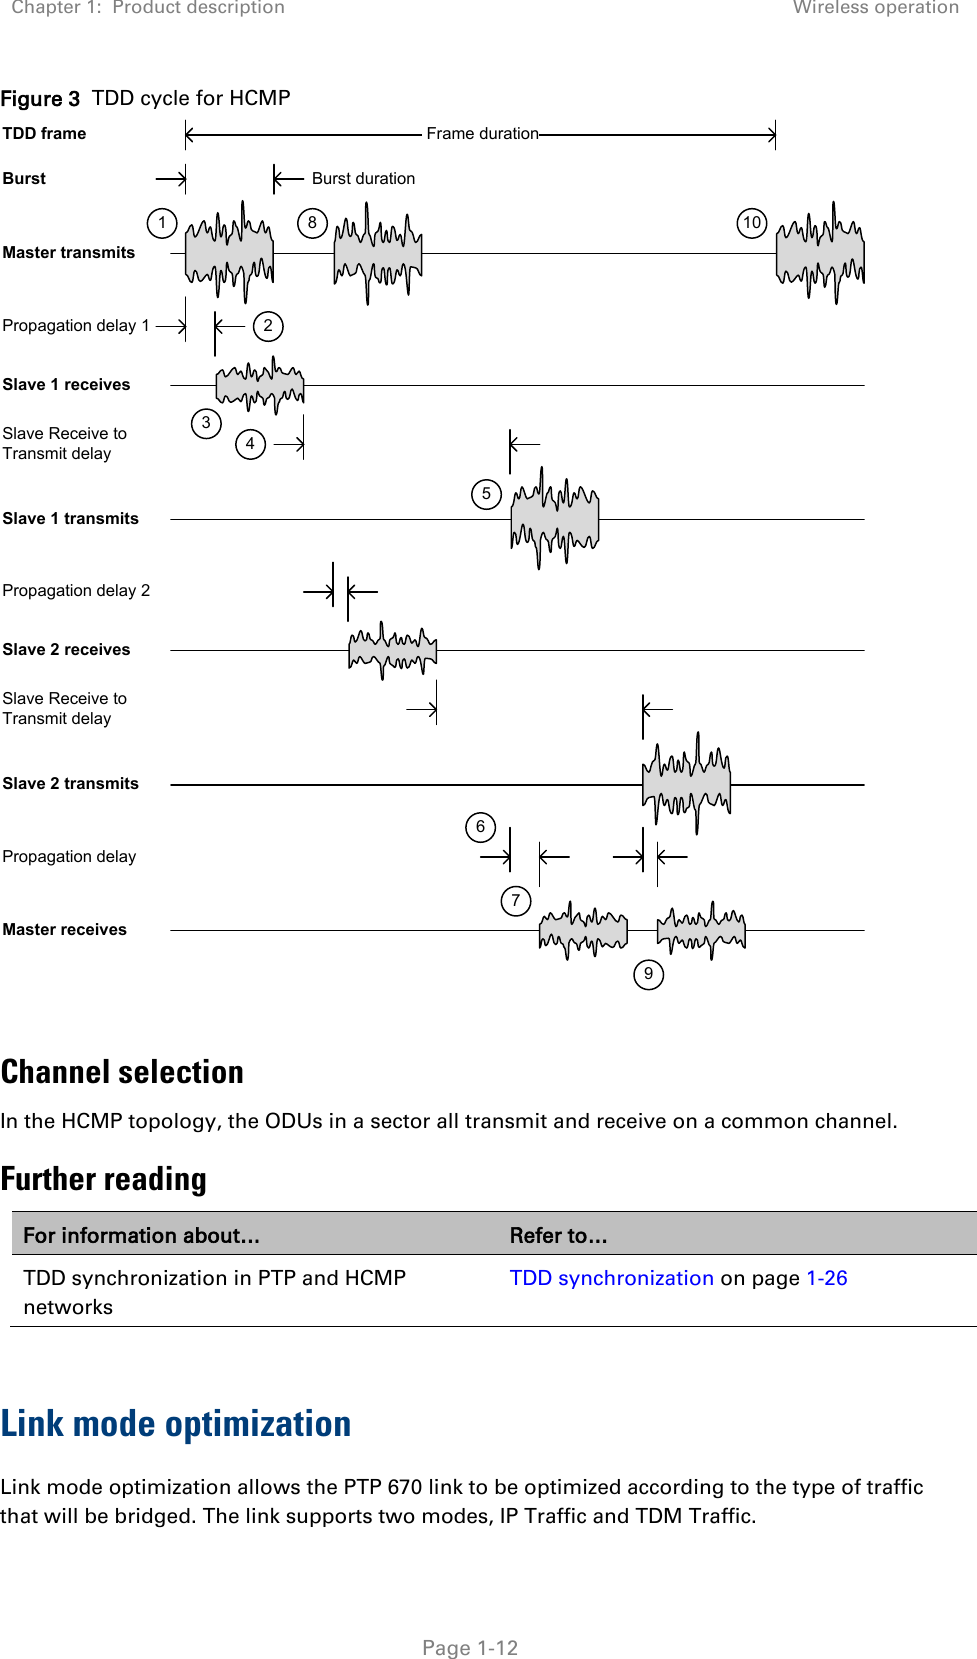 Chapter 1:  Product description Wireless operation   Page 1-12 Figure 3  TDD cycle for HCMP   Channel selection In the HCMP topology, the ODUs in a sector all transmit and receive on a common channel. Further reading For information about… Refer to… TDD synchronization in PTP and HCMP networks TDD synchronization on page 1-26  Link mode optimization Link mode optimization allows the PTP 670 link to be optimized according to the type of traffic that will be bridged. The link supports two modes, IP Traffic and TDM Traffic.  Frame duration TDD frameMaster transmitsSlave 1 receivesPropagation delay 1Burst Burst durationSlave Receive to Transmit delaySlave 1 transmitsSlave 2 receivesPropagation delay 2Slave Receive to Transmit delaySlave 2 transmitsMaster receivesPropagation delay12345678910